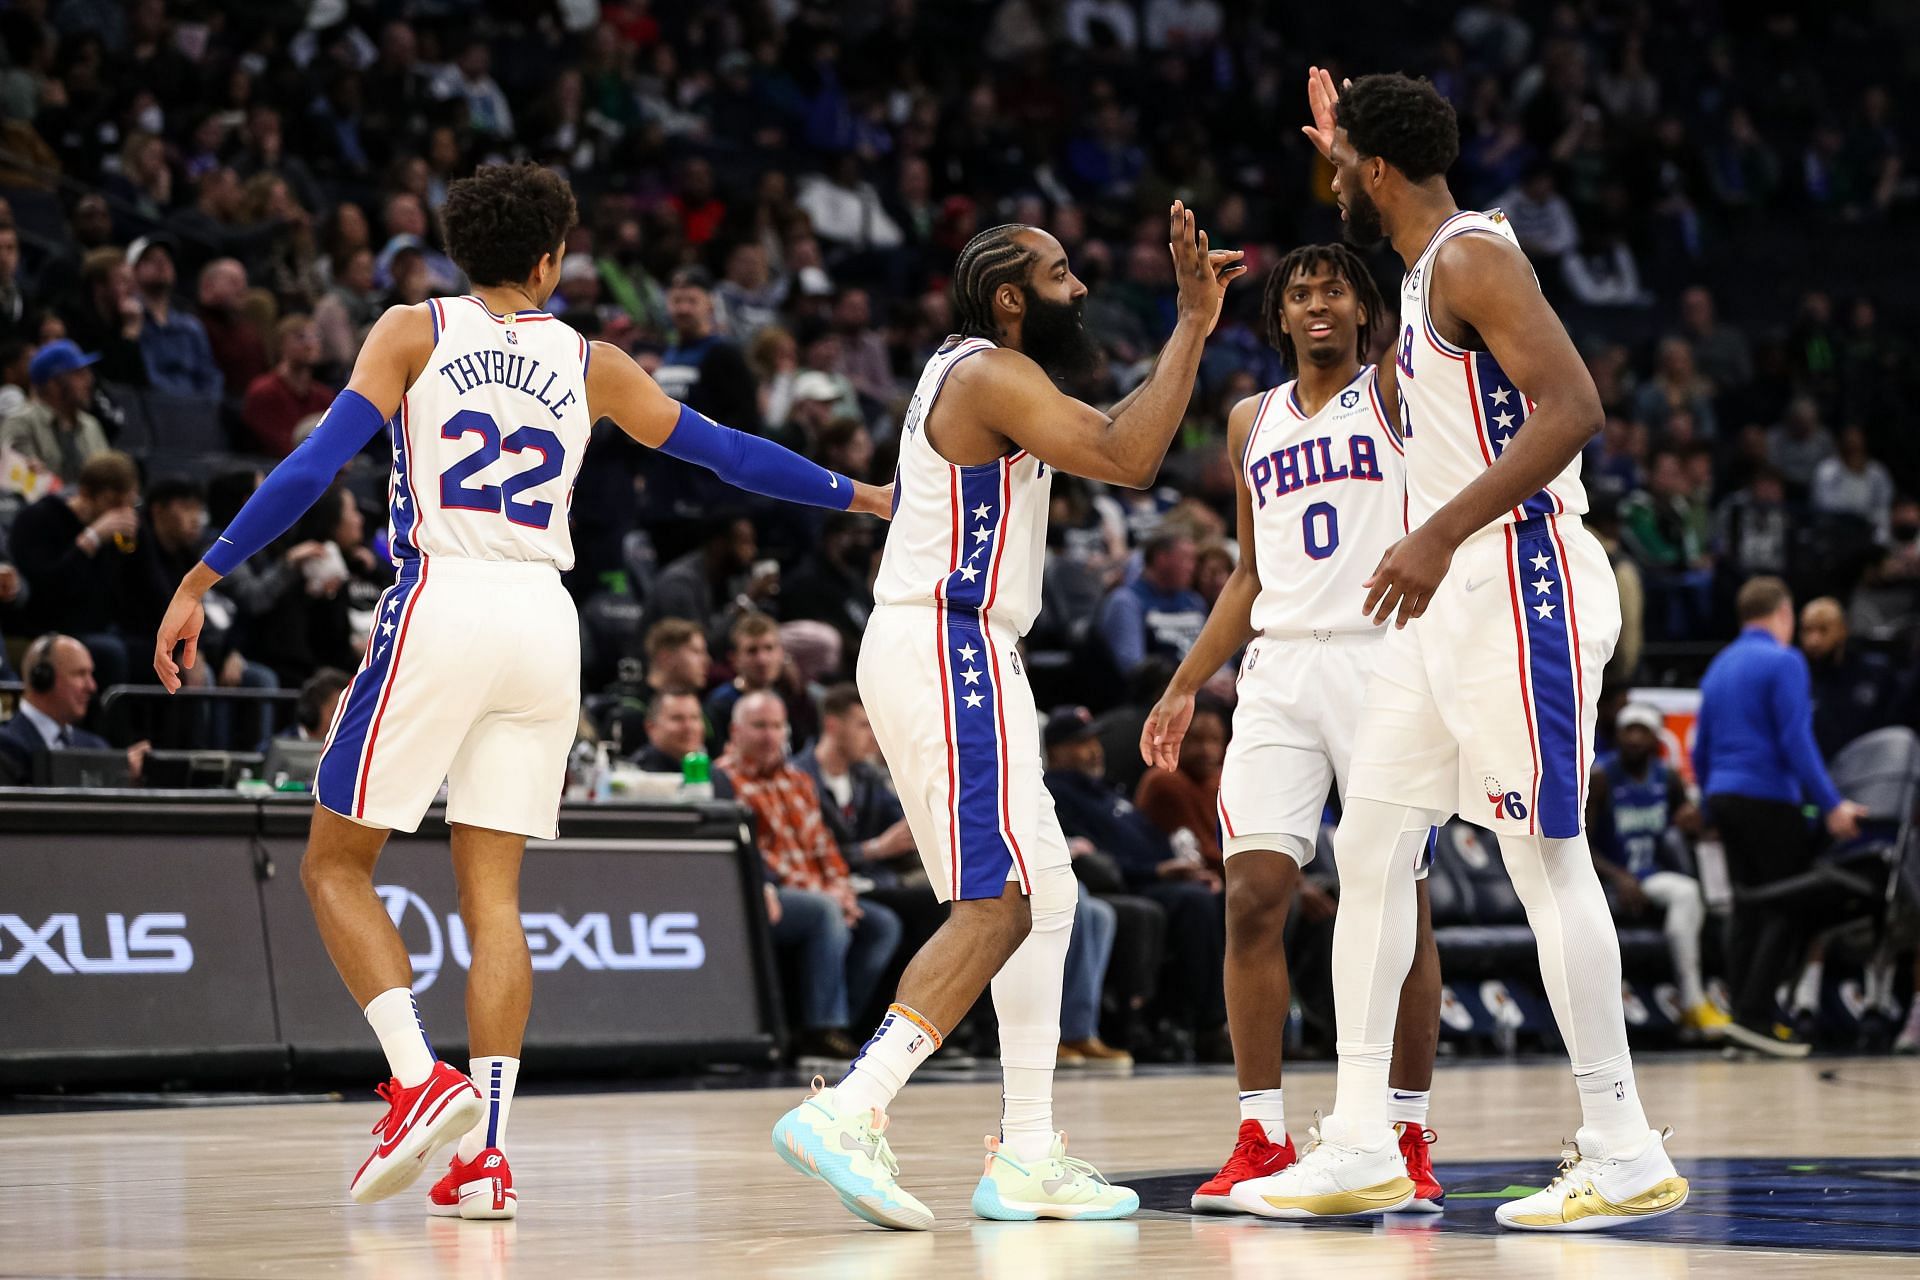 The Philadelphia 76ers now have a new Big 3 on their roster